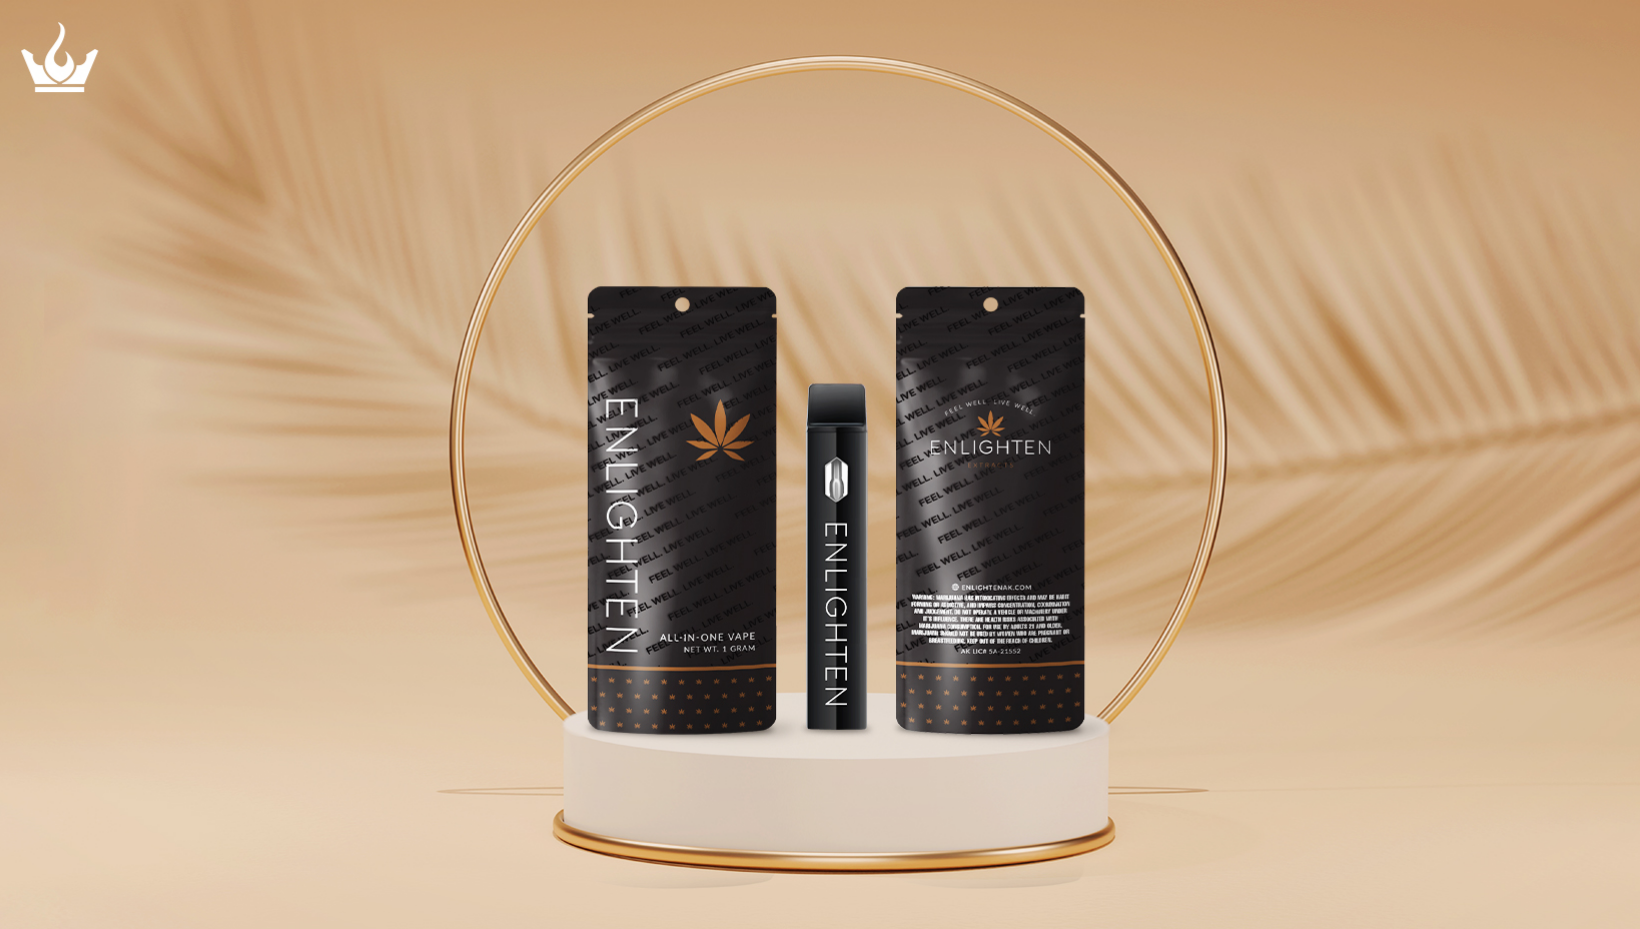 Enlighten Carries Flower, Pre-Rolls, Concentrates, Edibles, Topicals, CBD, Cannabis Glass and Accessory Needs